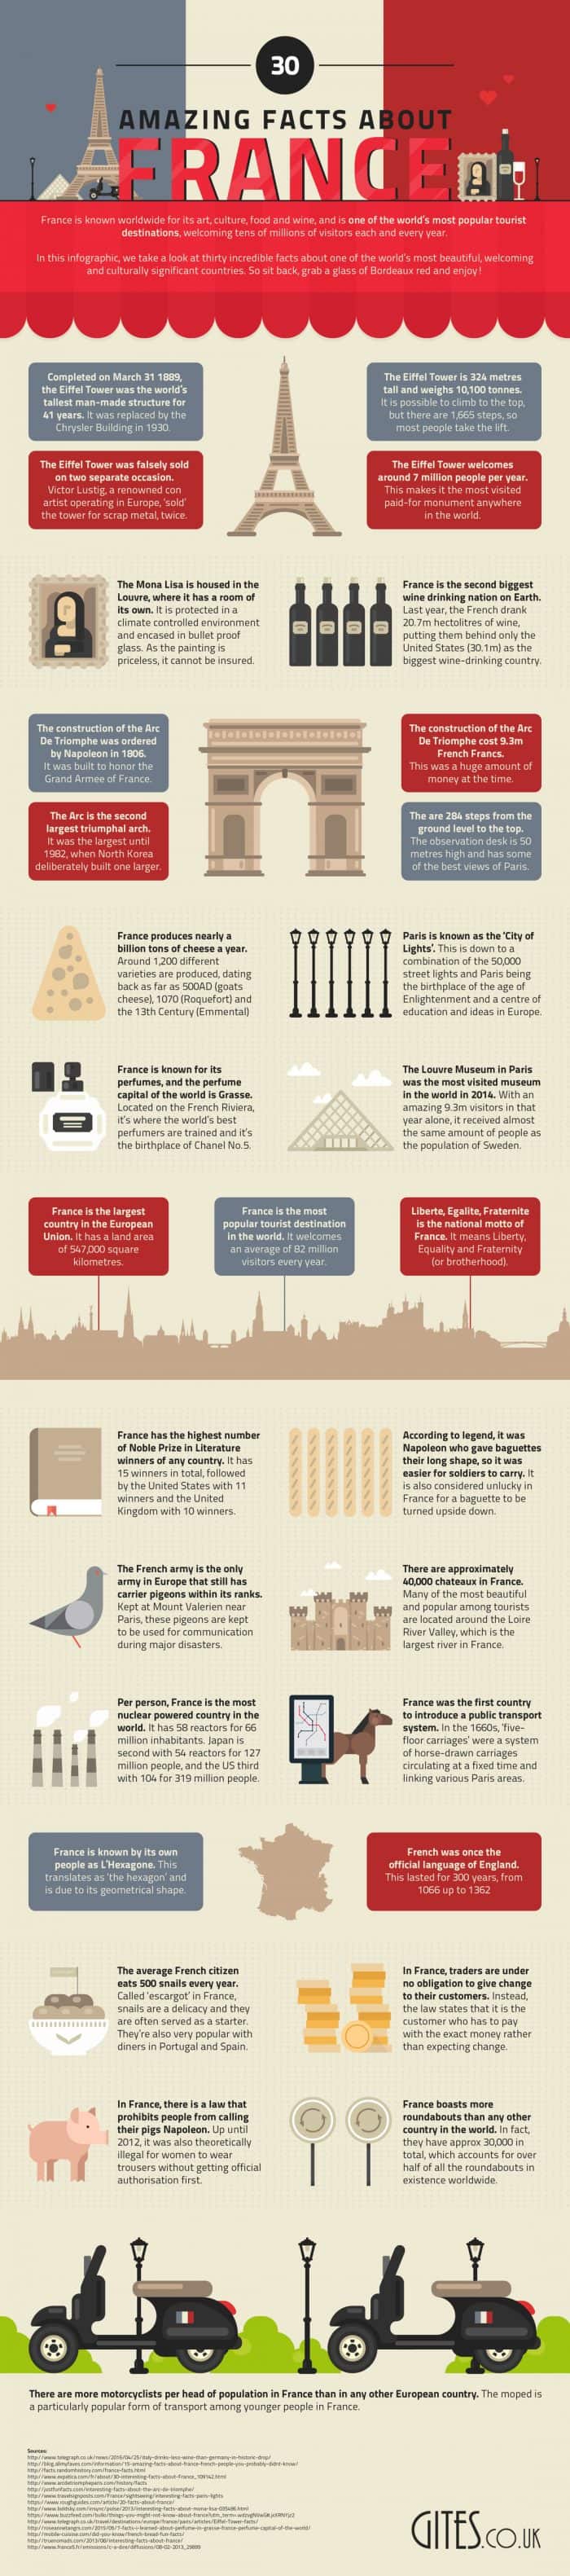 Infographic shwoing some interesting facts about France